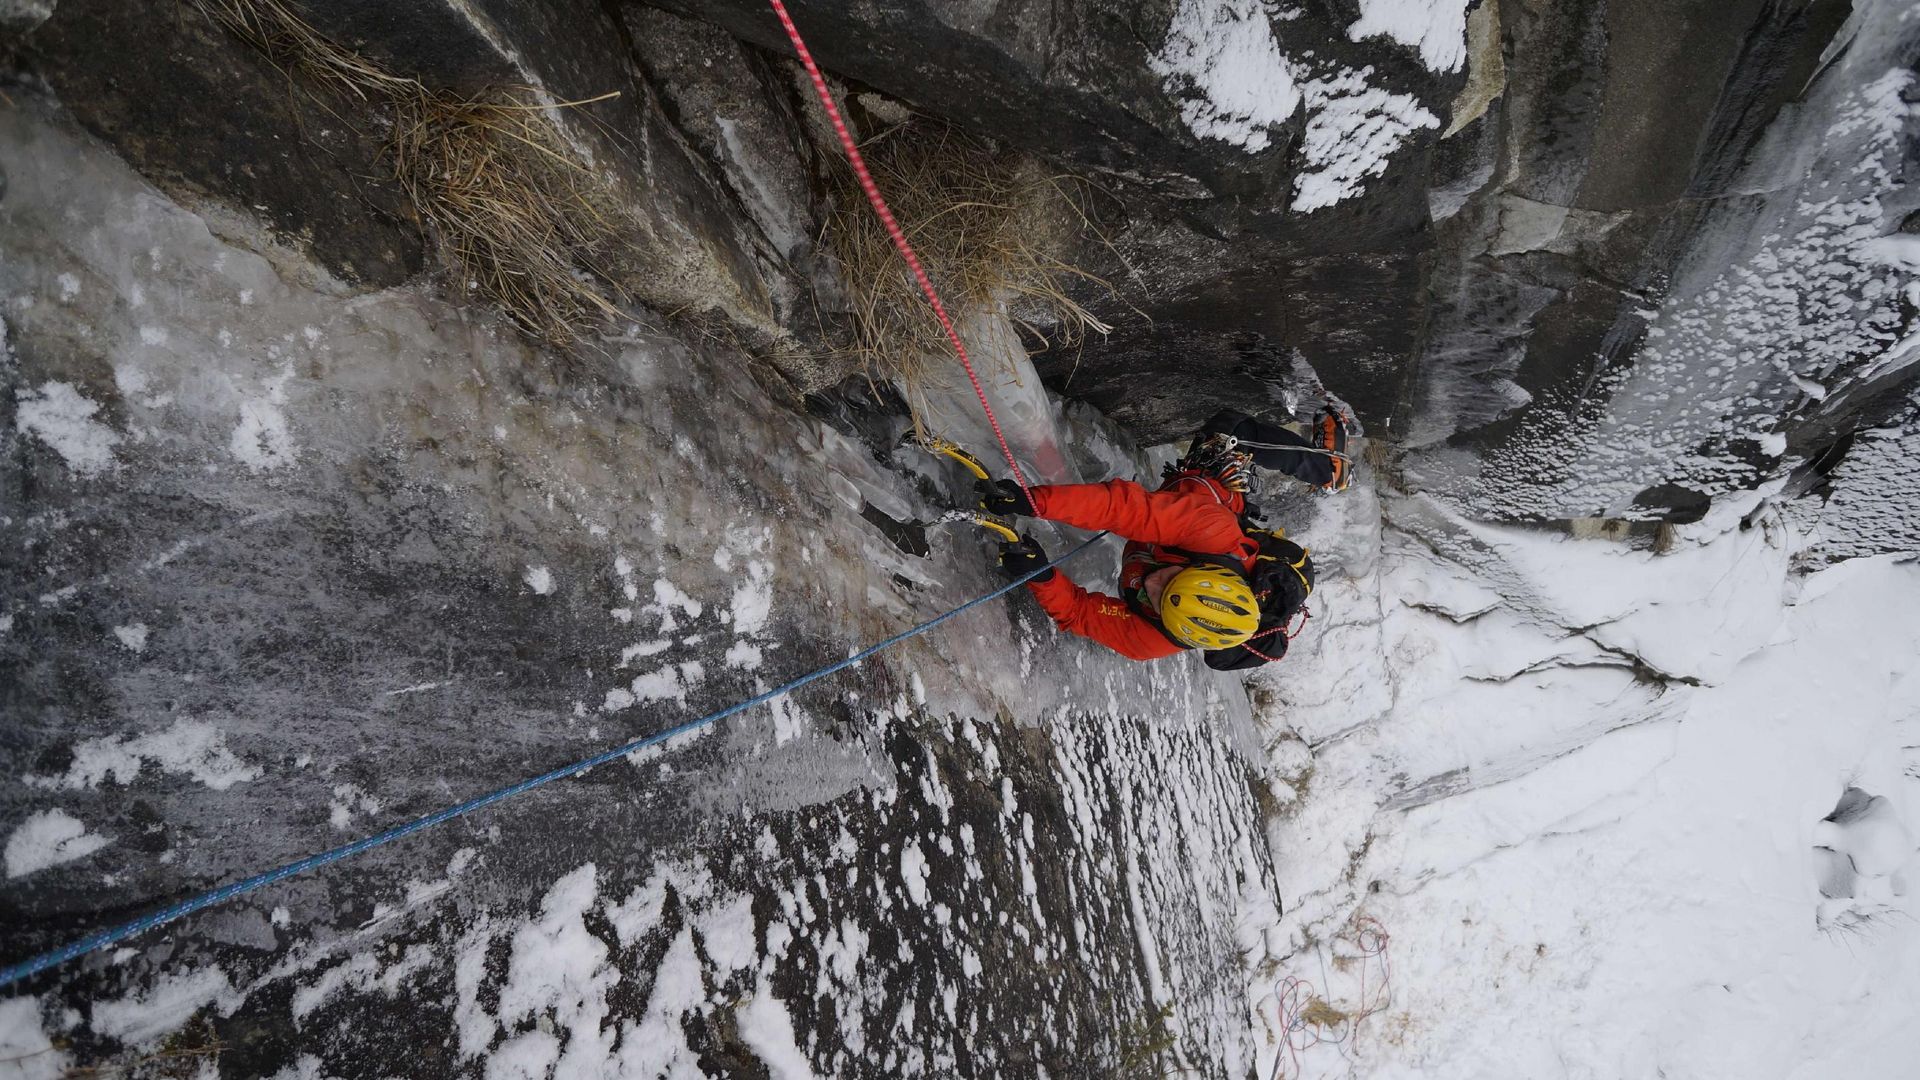 “No country for old men” First Ascent Rein in Taufers, South Tyrol 